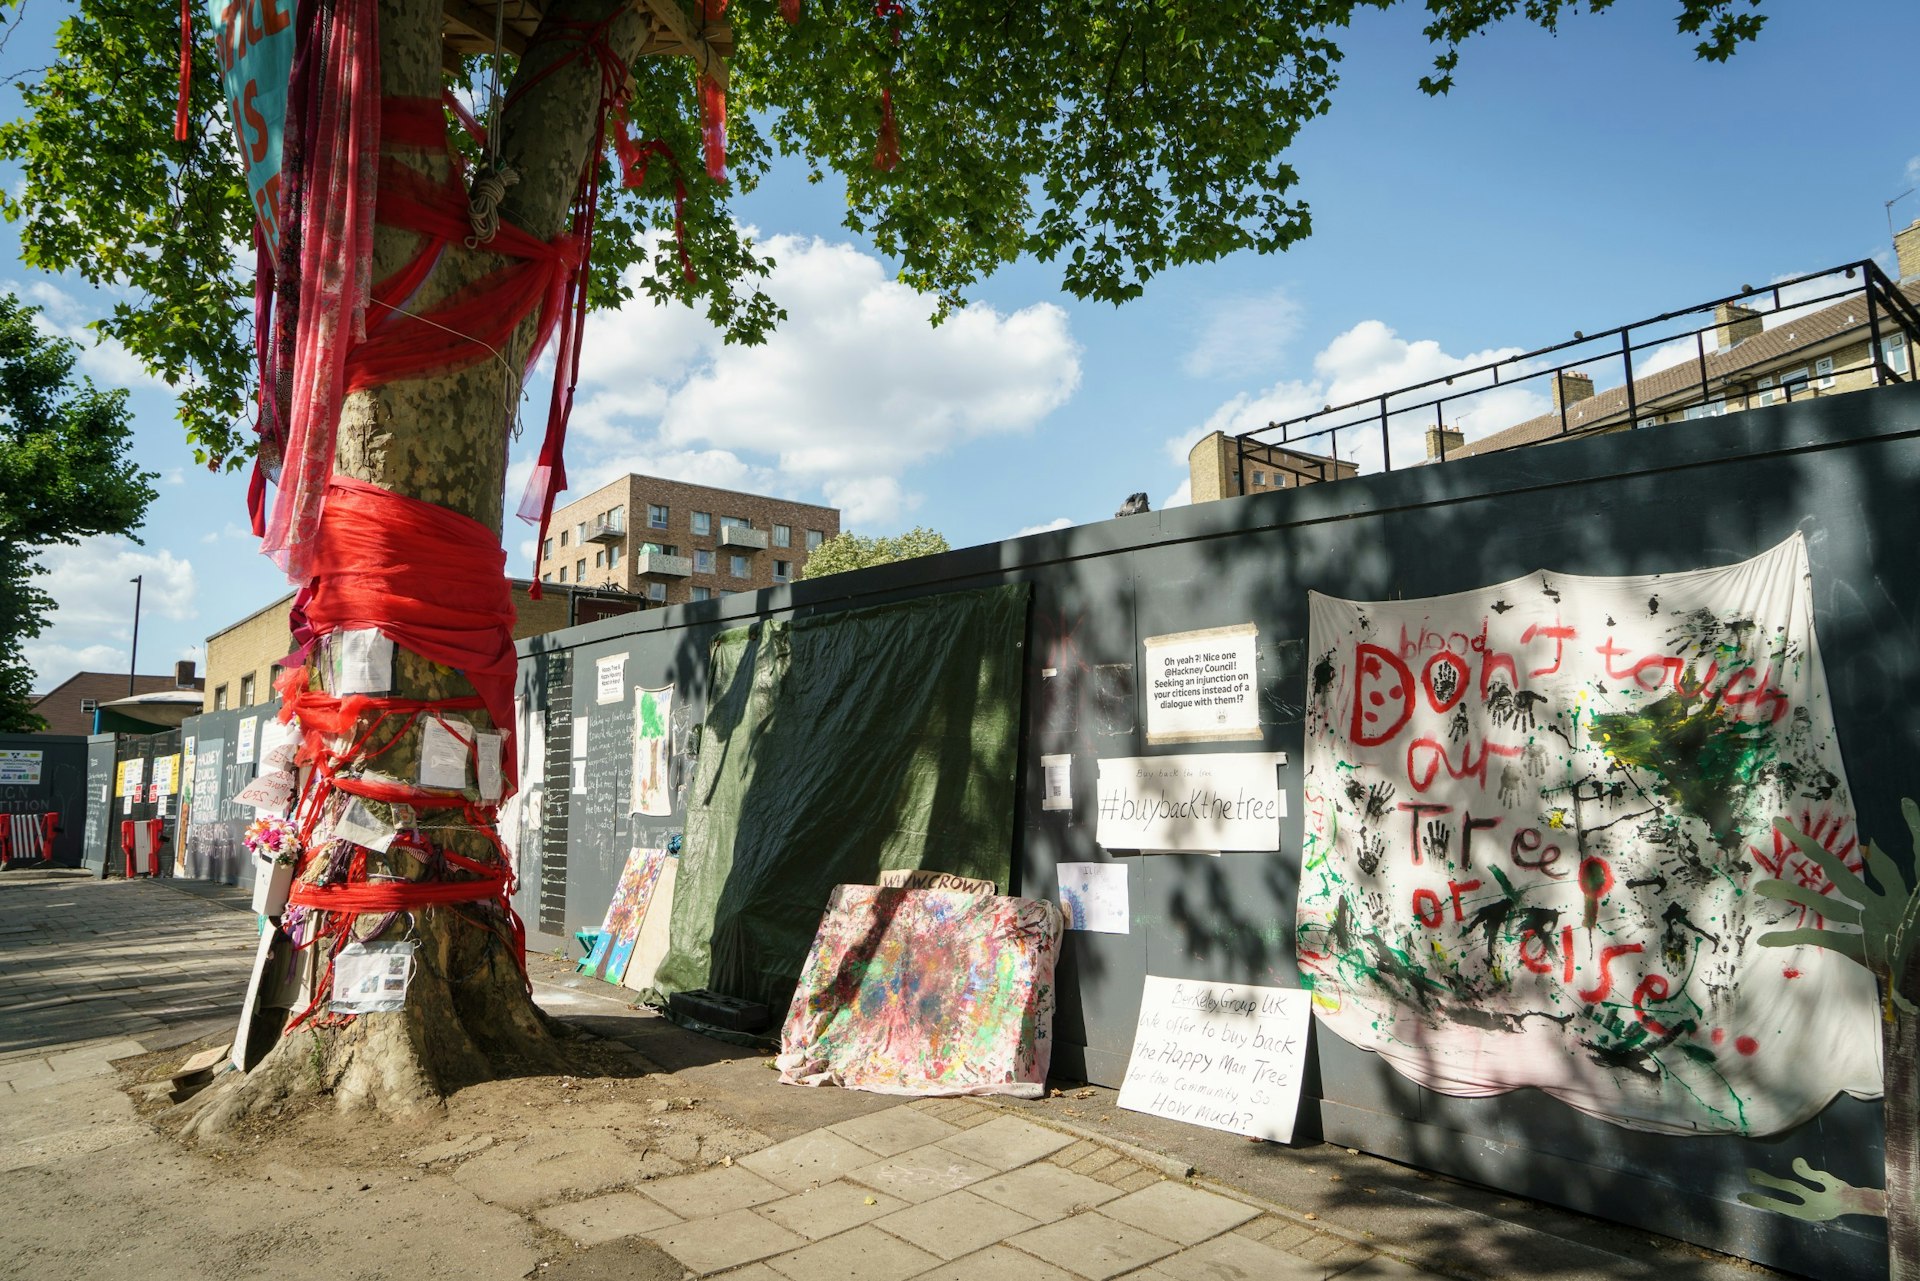 A tree tied with red material and posters urging the saving of the tree